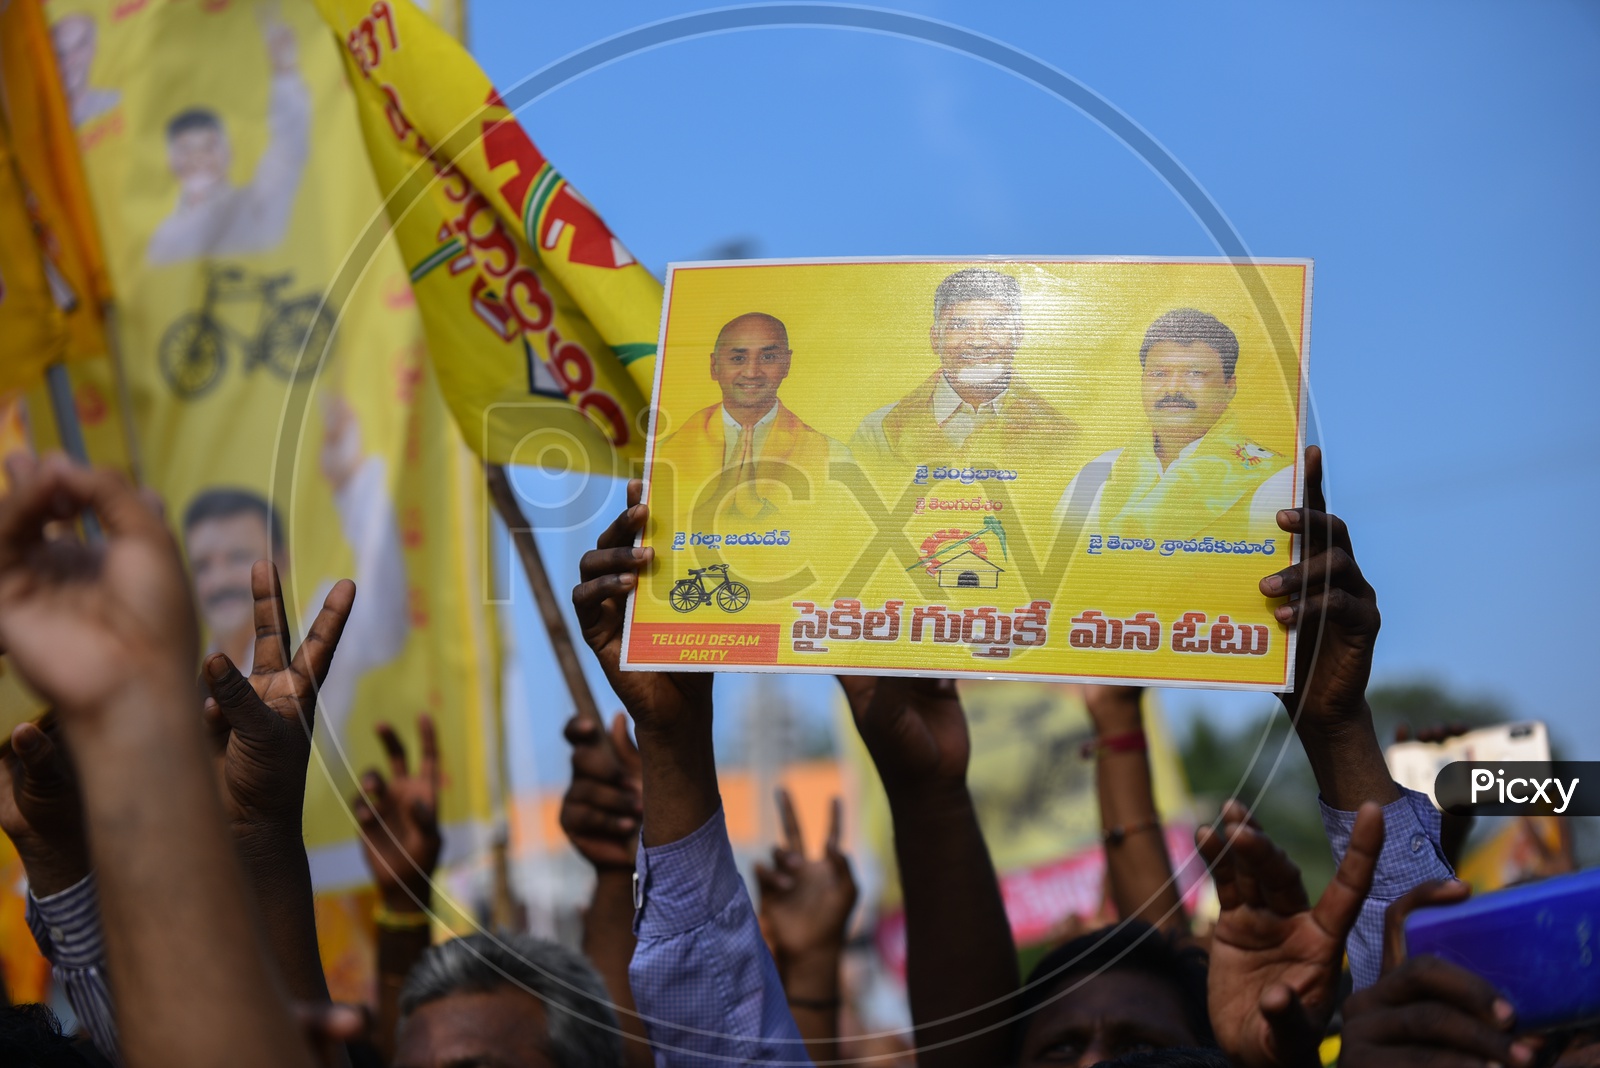 TDP Supporters With Party Placards During Election Campaign Rally